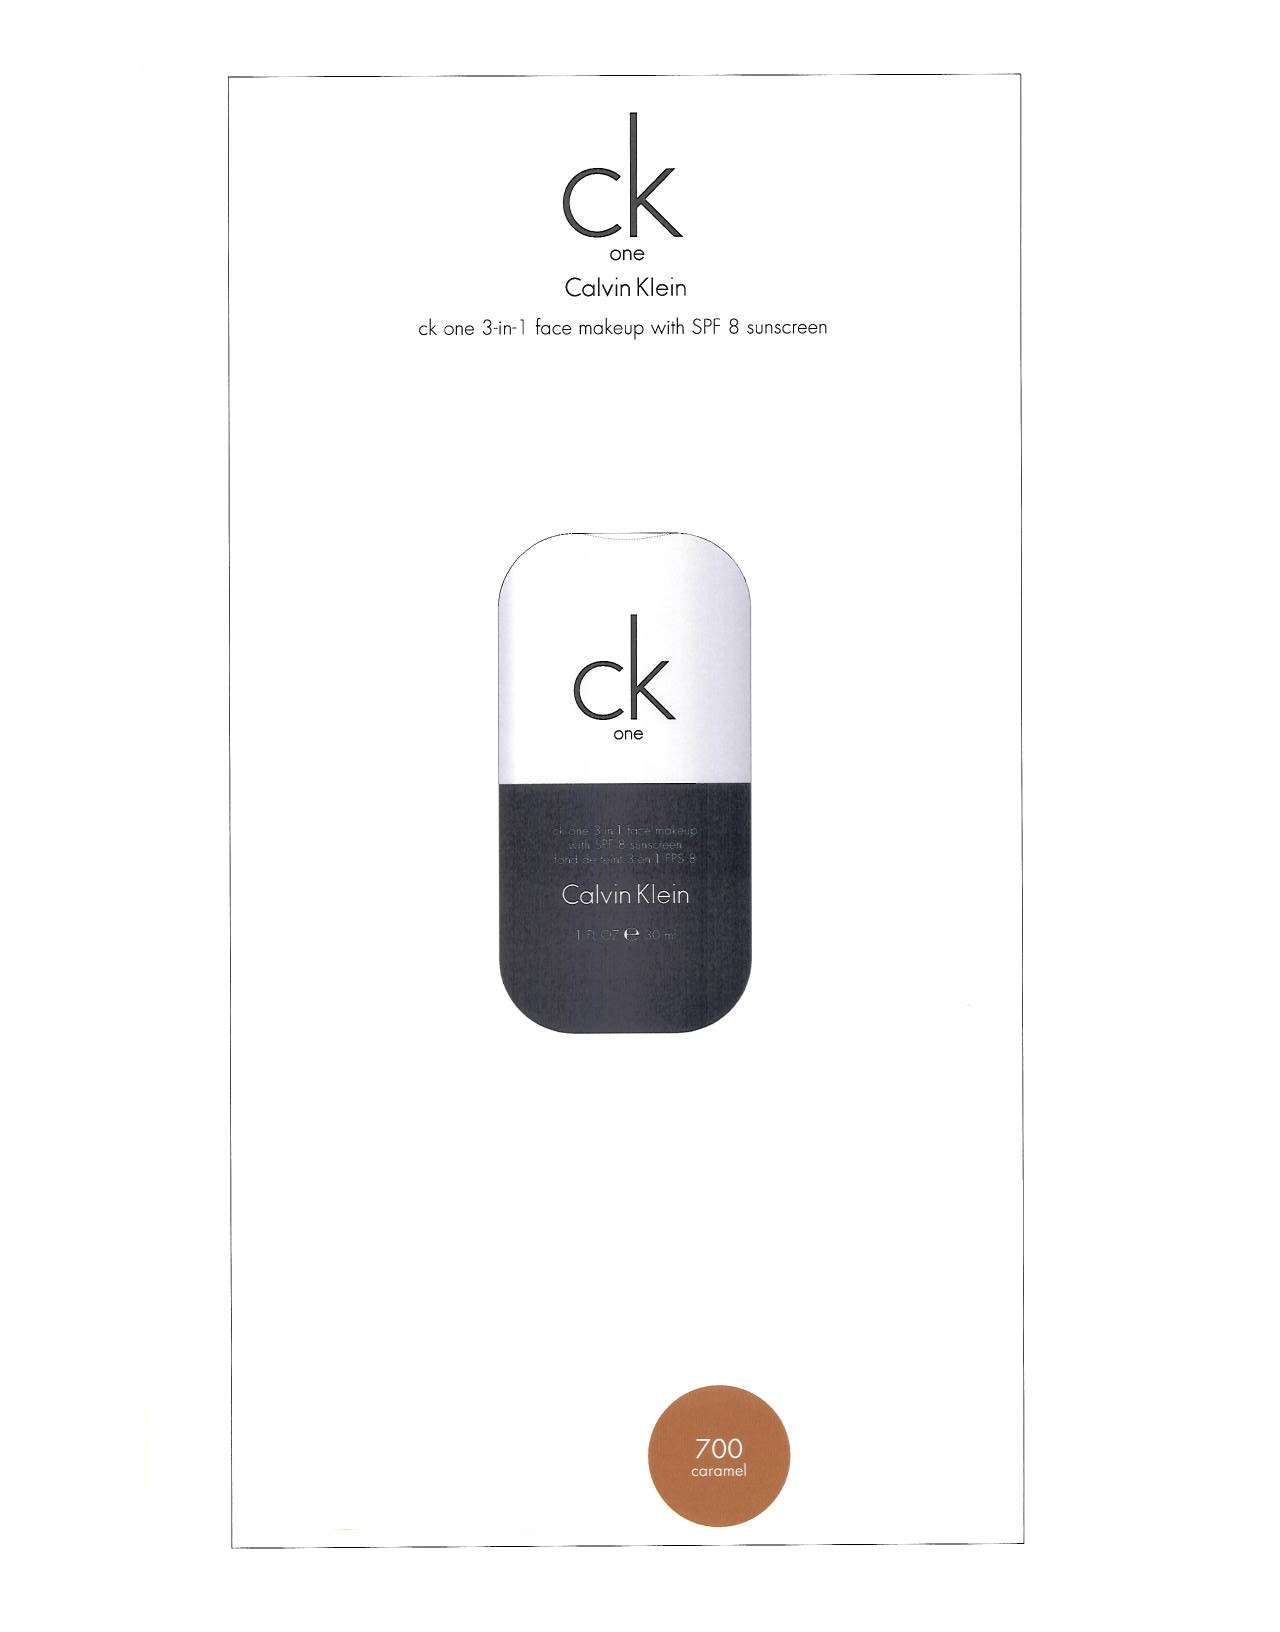 ck one 3-in-1 face makeup